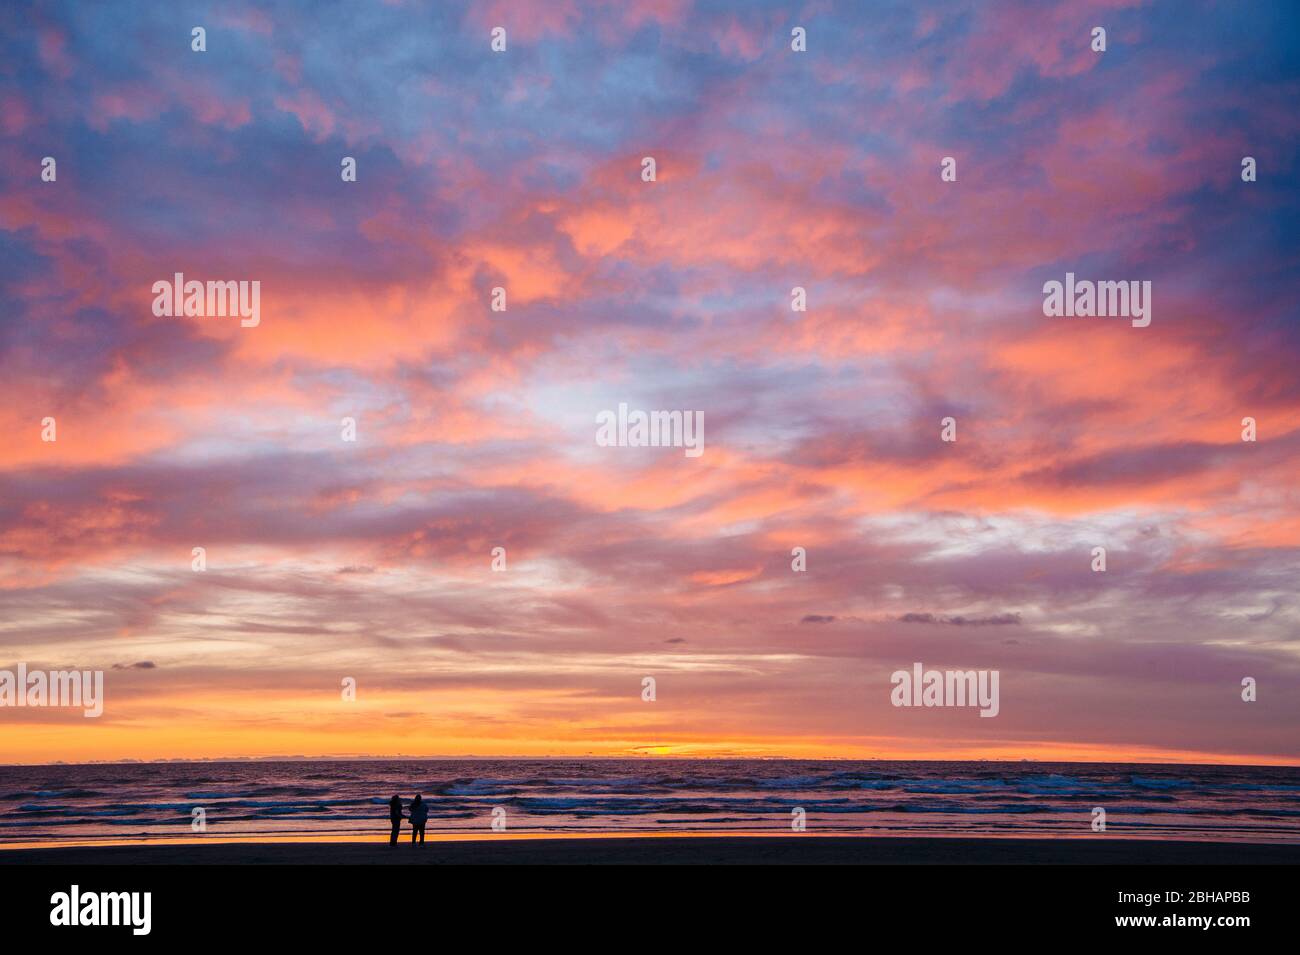 Silhouette of two people standing on beach against dramatic sky at sunset, Seaside, Oregon, USA Stock Photo